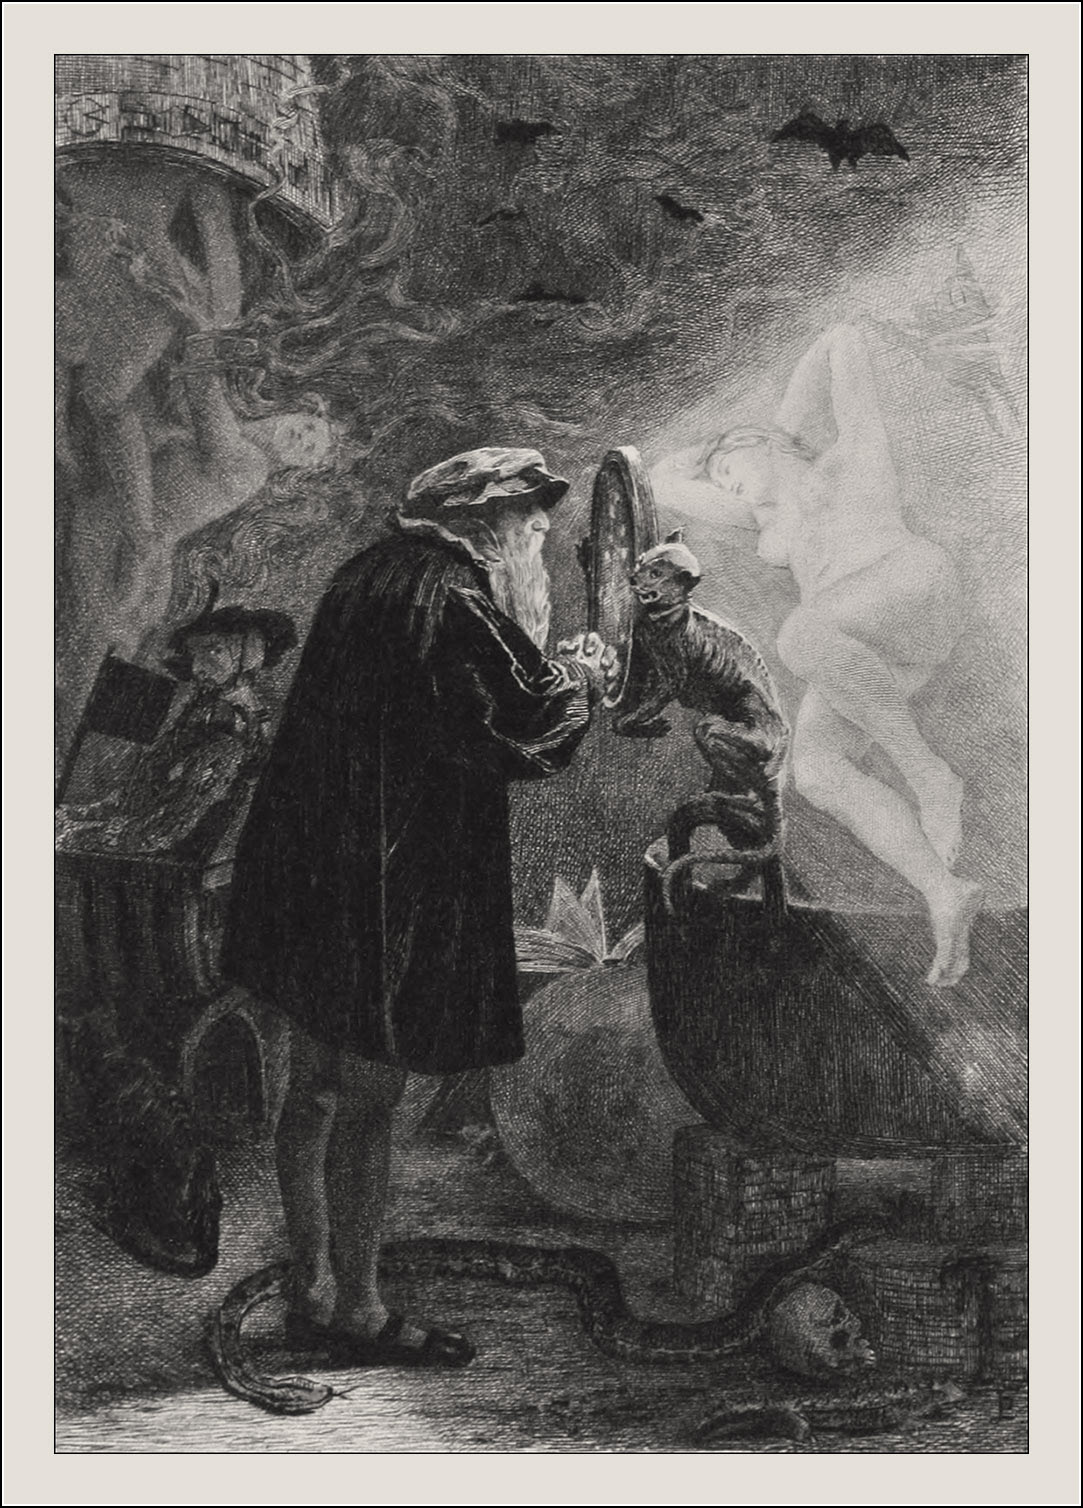  J.P. Laurens. The first part of Faust